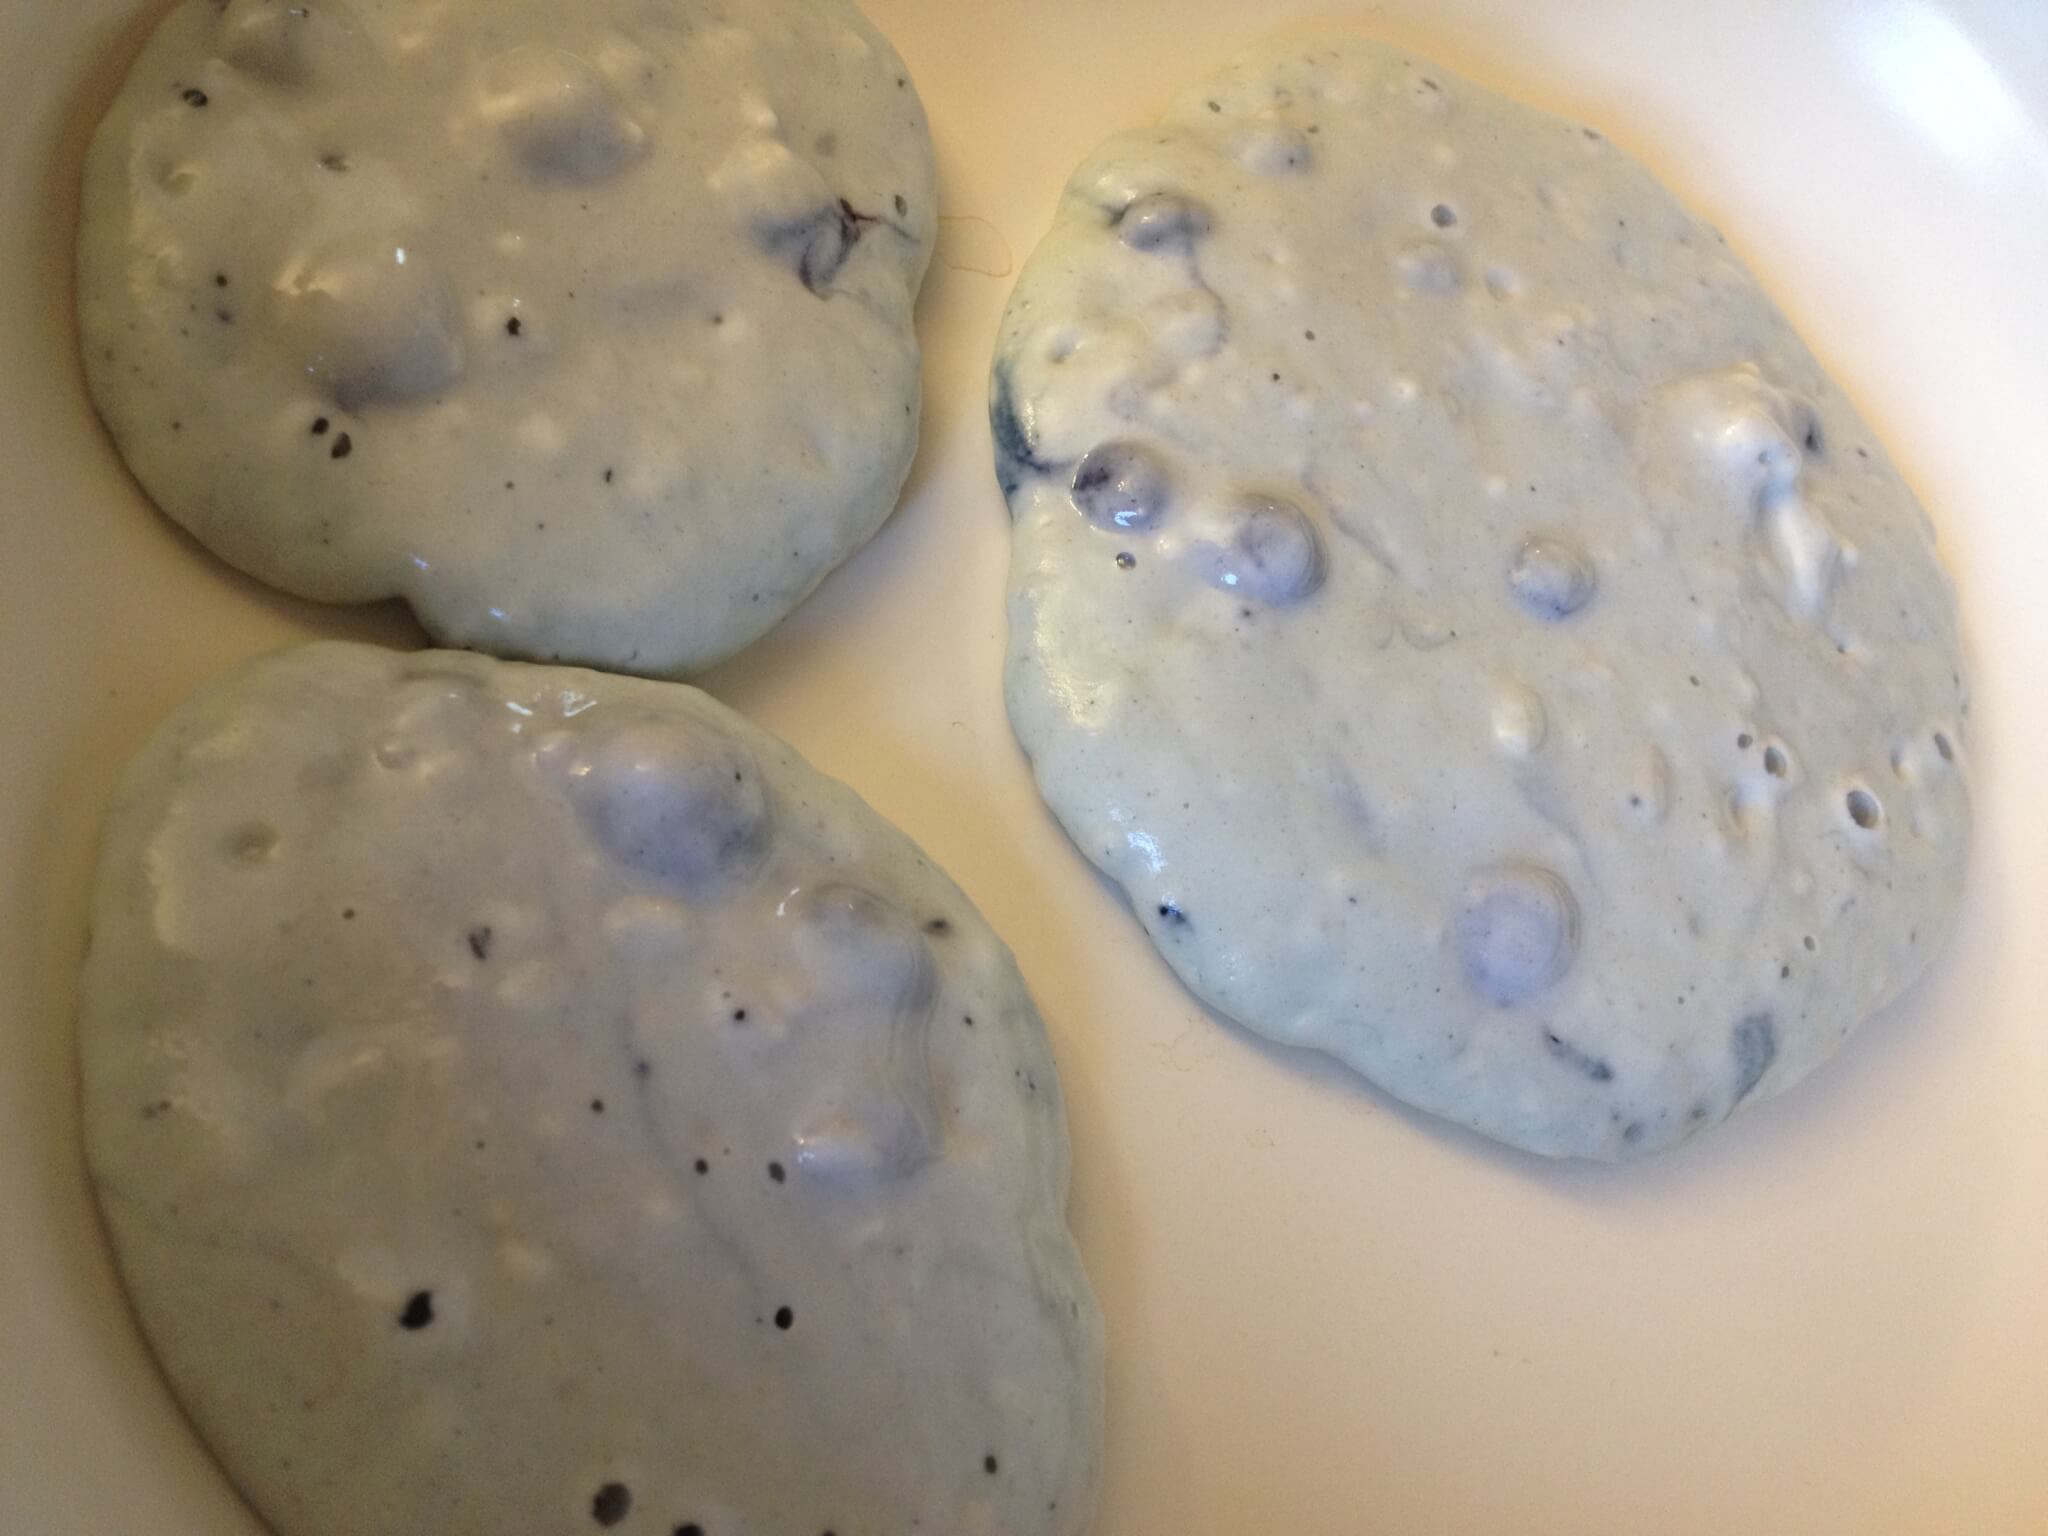 Cooking Frozen-inspired protein blueberry pancakes on a ceramaic frying pan requires no butter or oil.